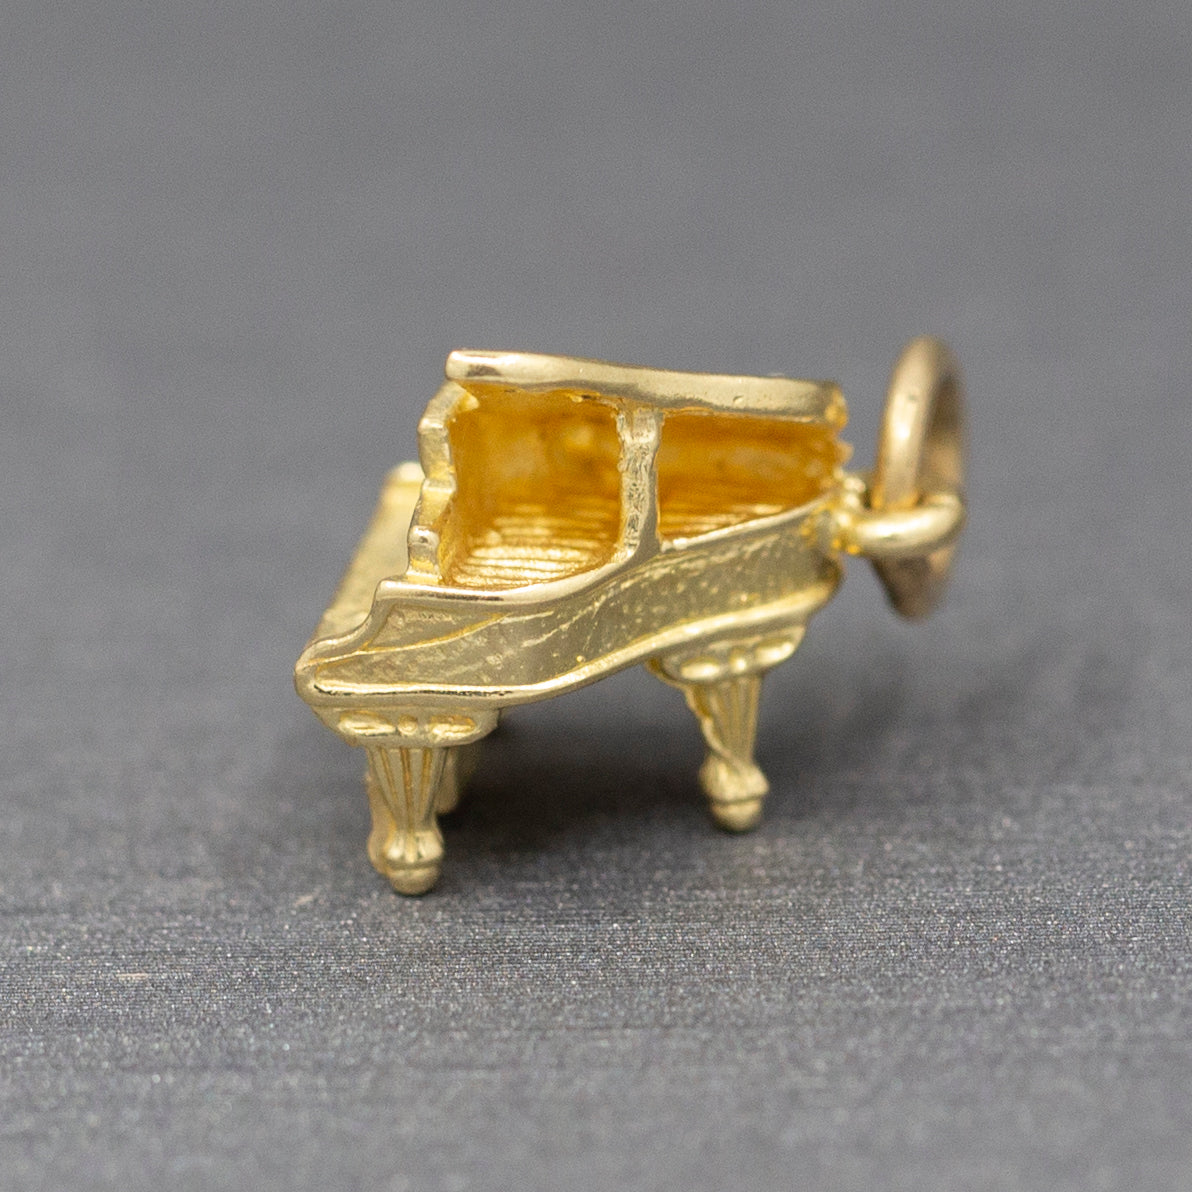 Vintage Grand Piano Charm Pendant in 14k Yellow Gold